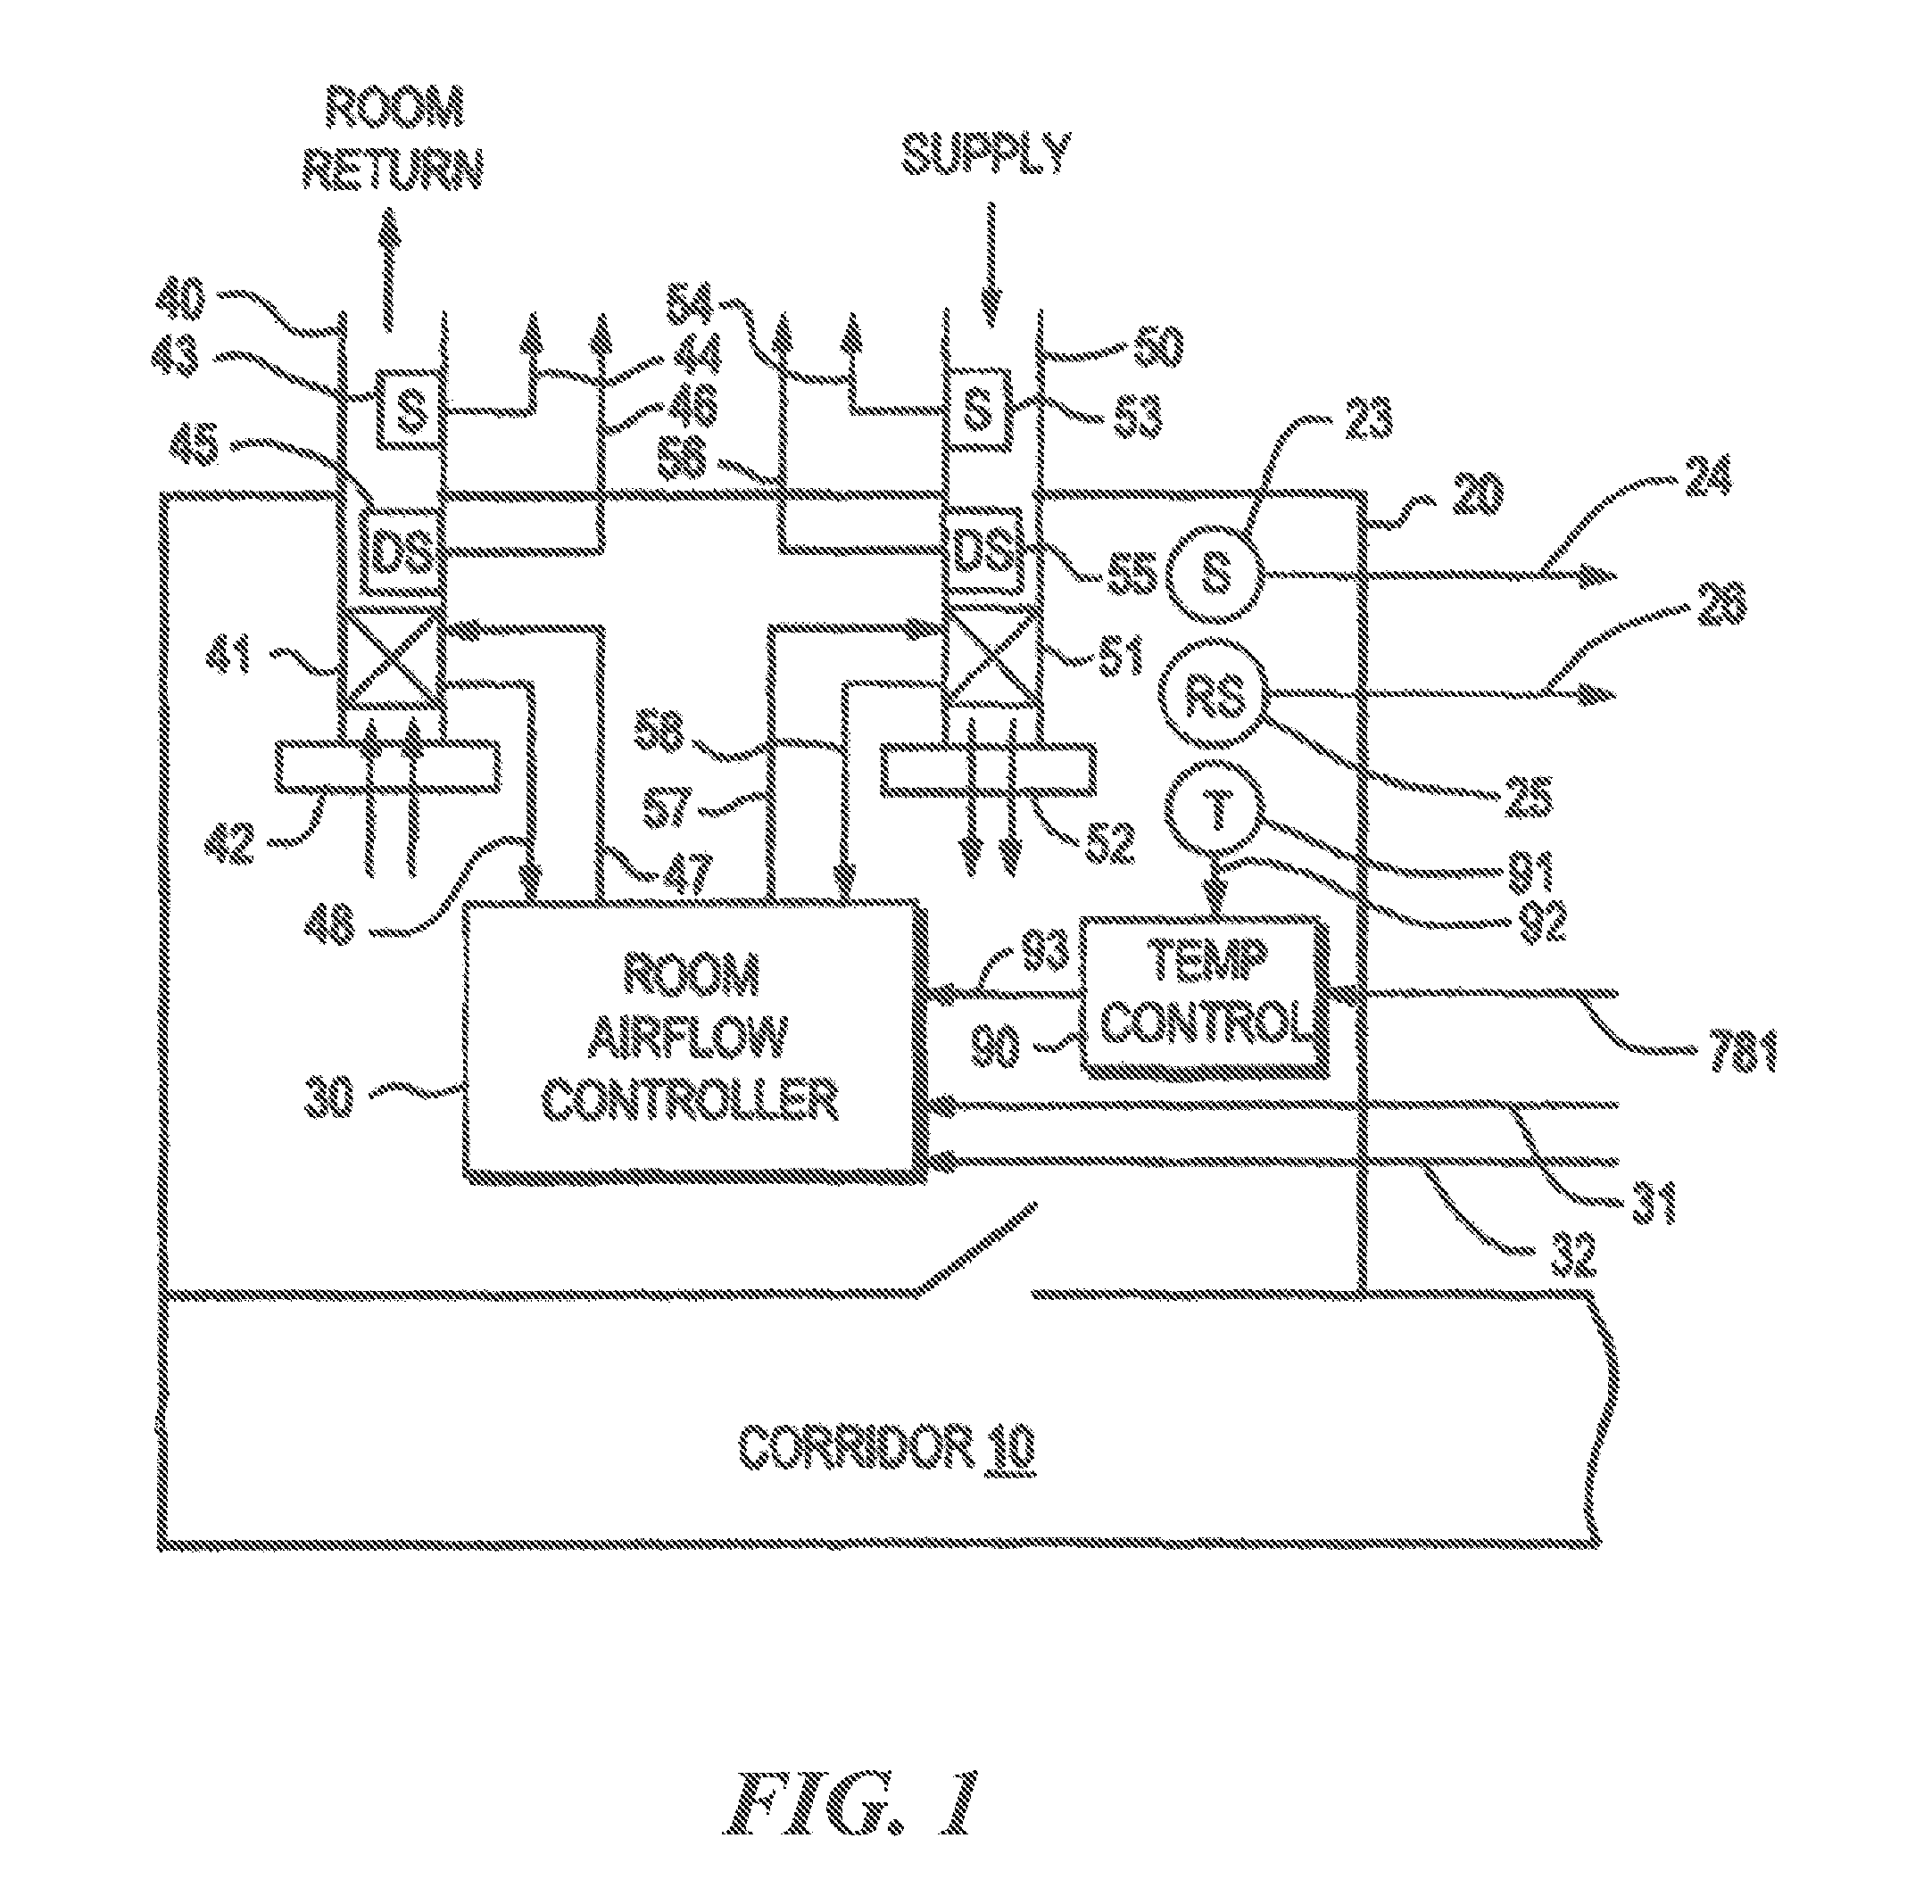 Methods and apparatus for indoor air contaminant monitoring